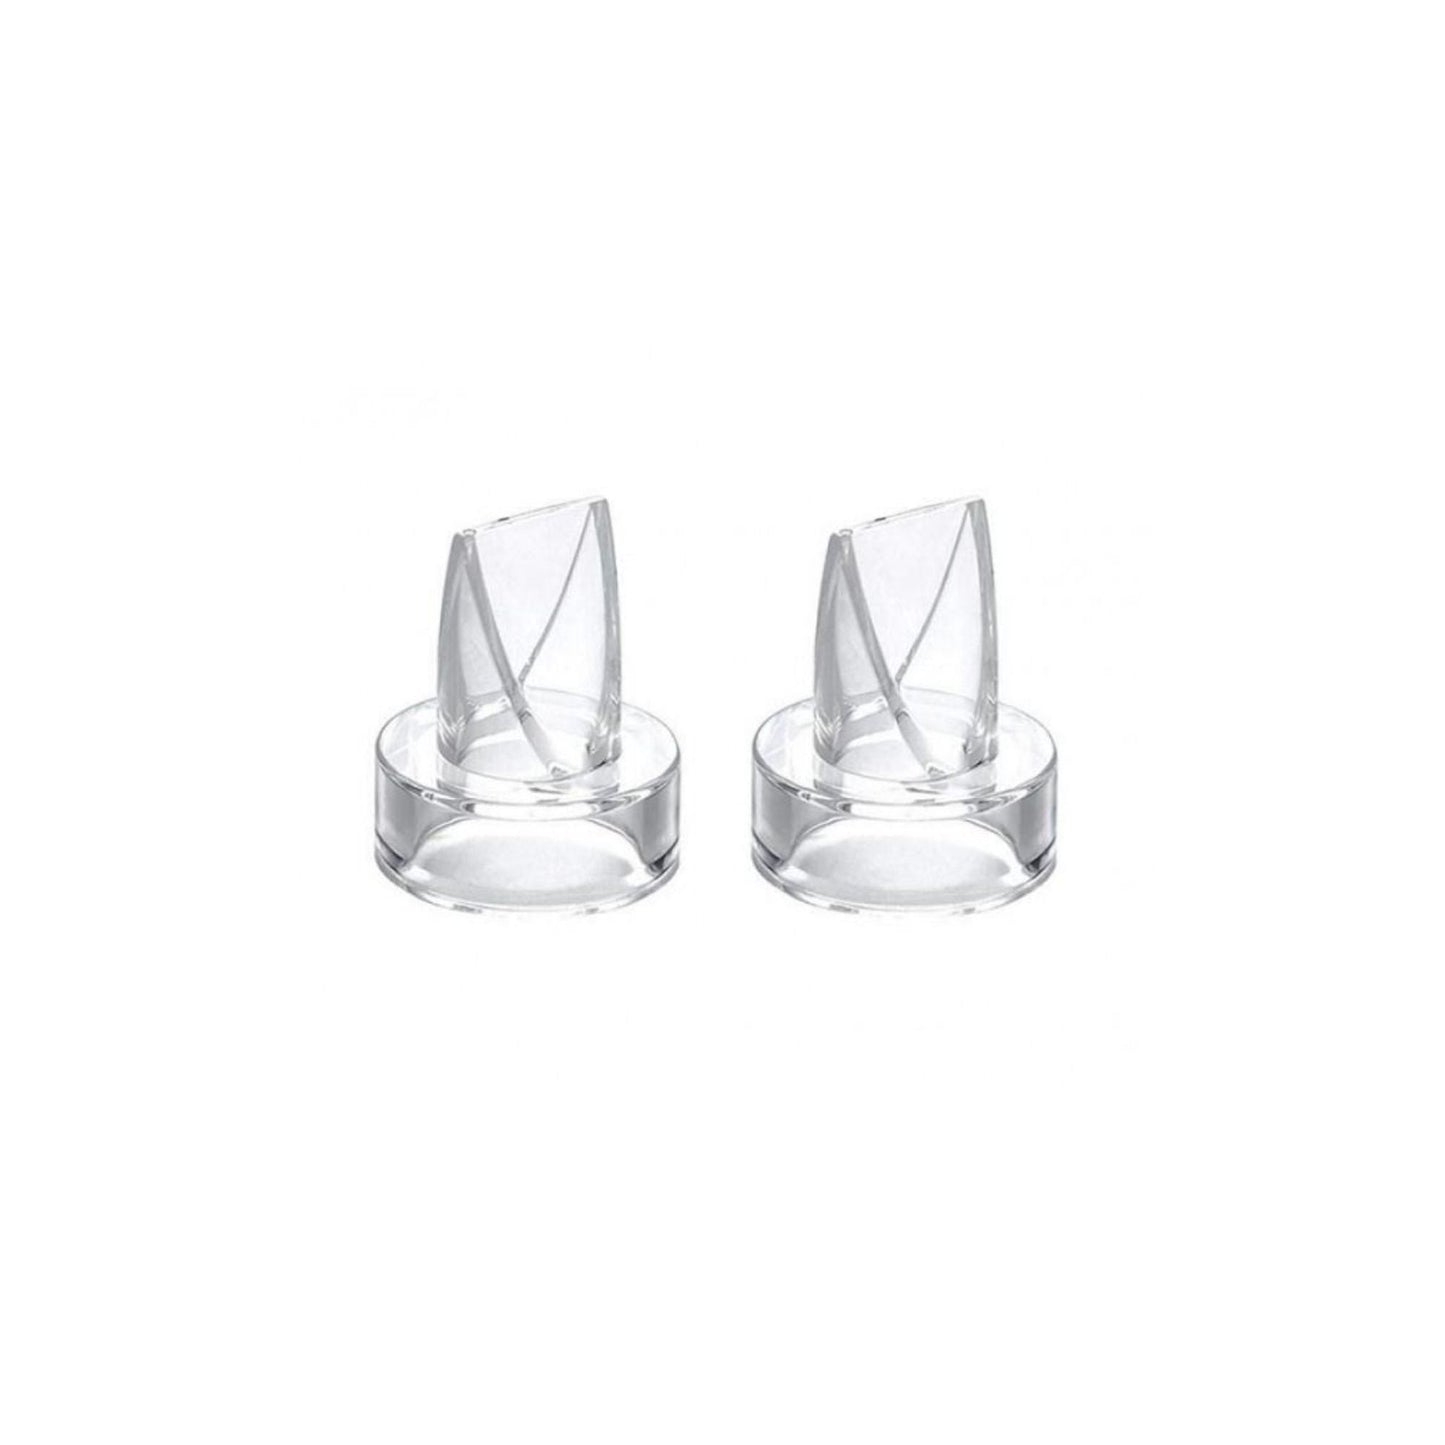 Spectra  Valve for Handsfree Cups [Pack 2]